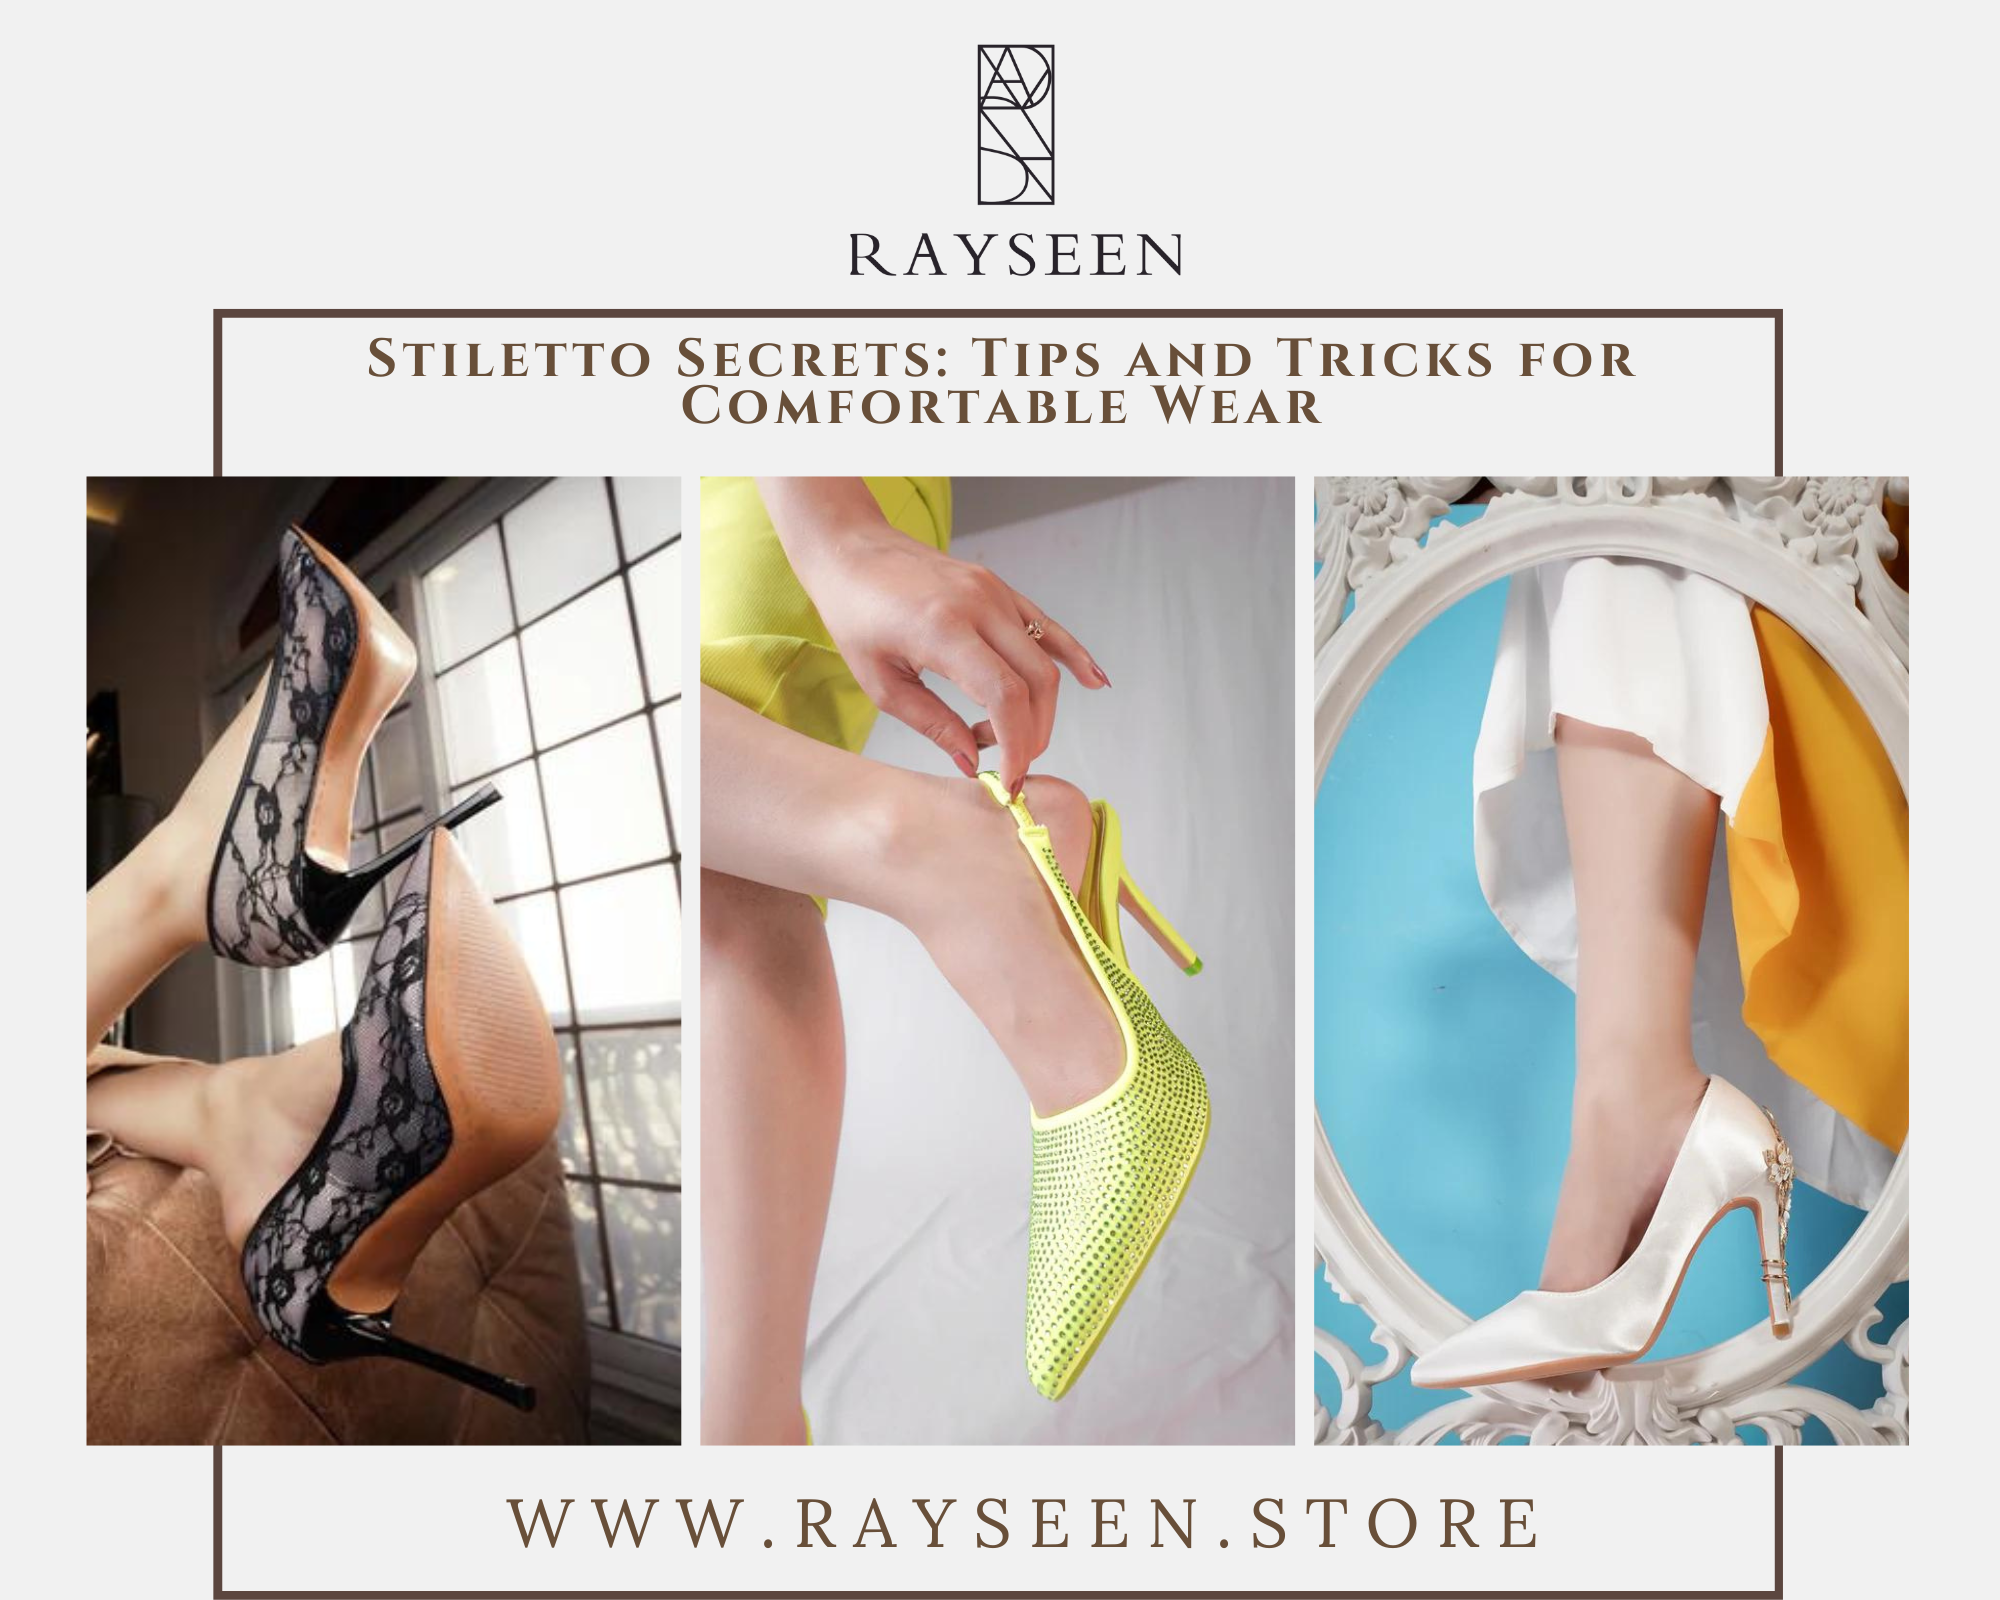 Stiletto Secrets Tips and Tricks for Comfortable Wear